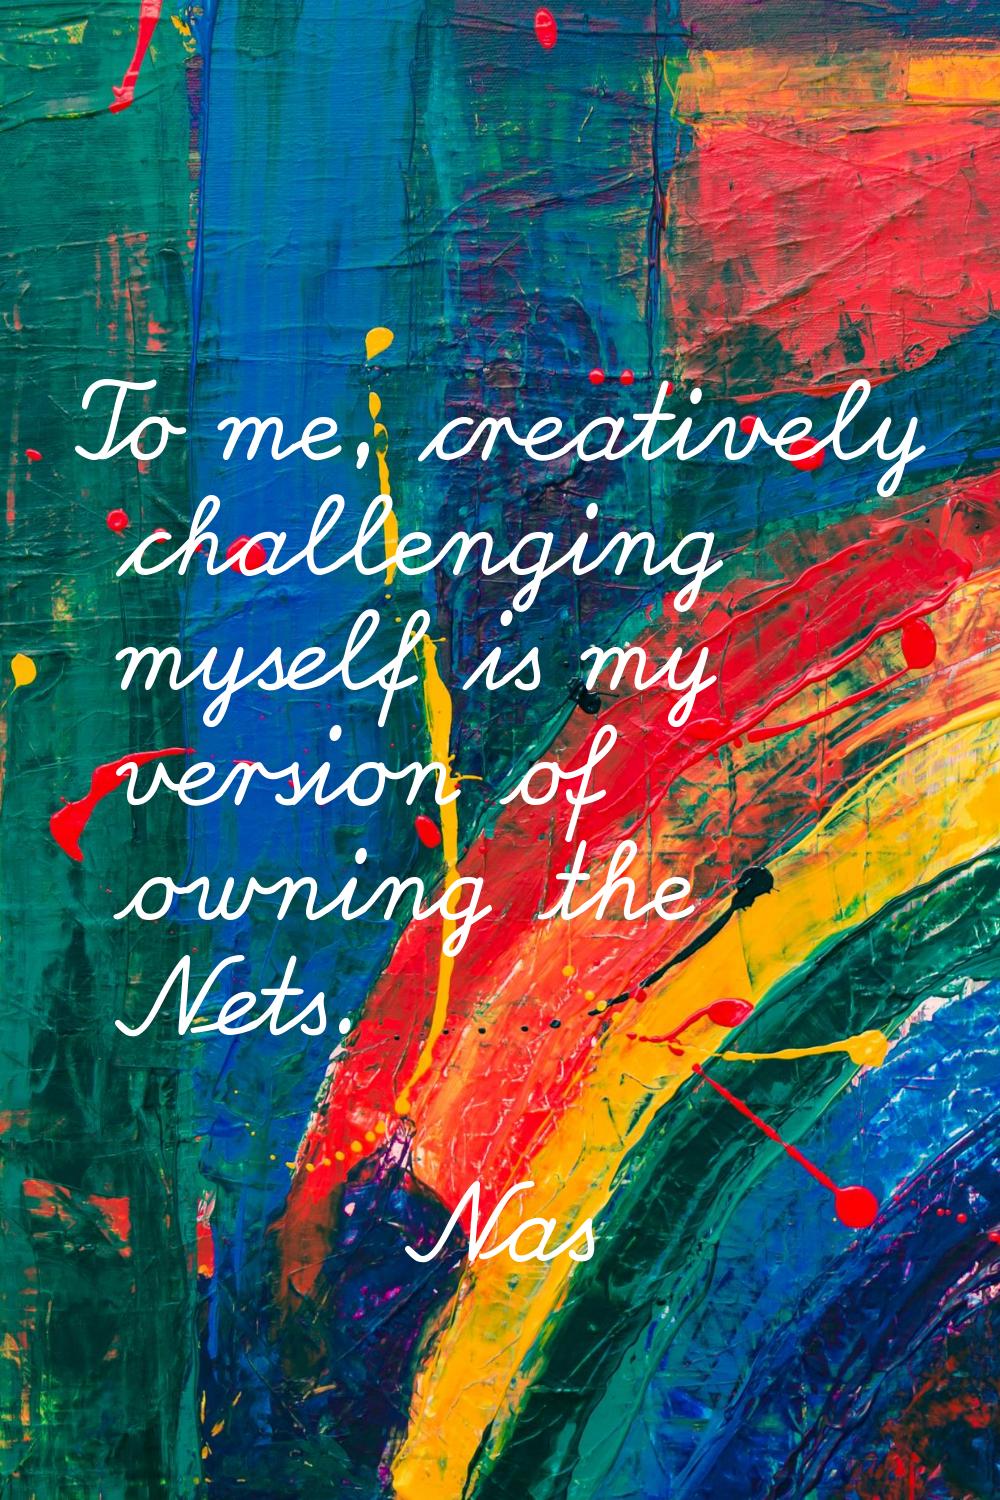 To me, creatively challenging myself is my version of owning the Nets.